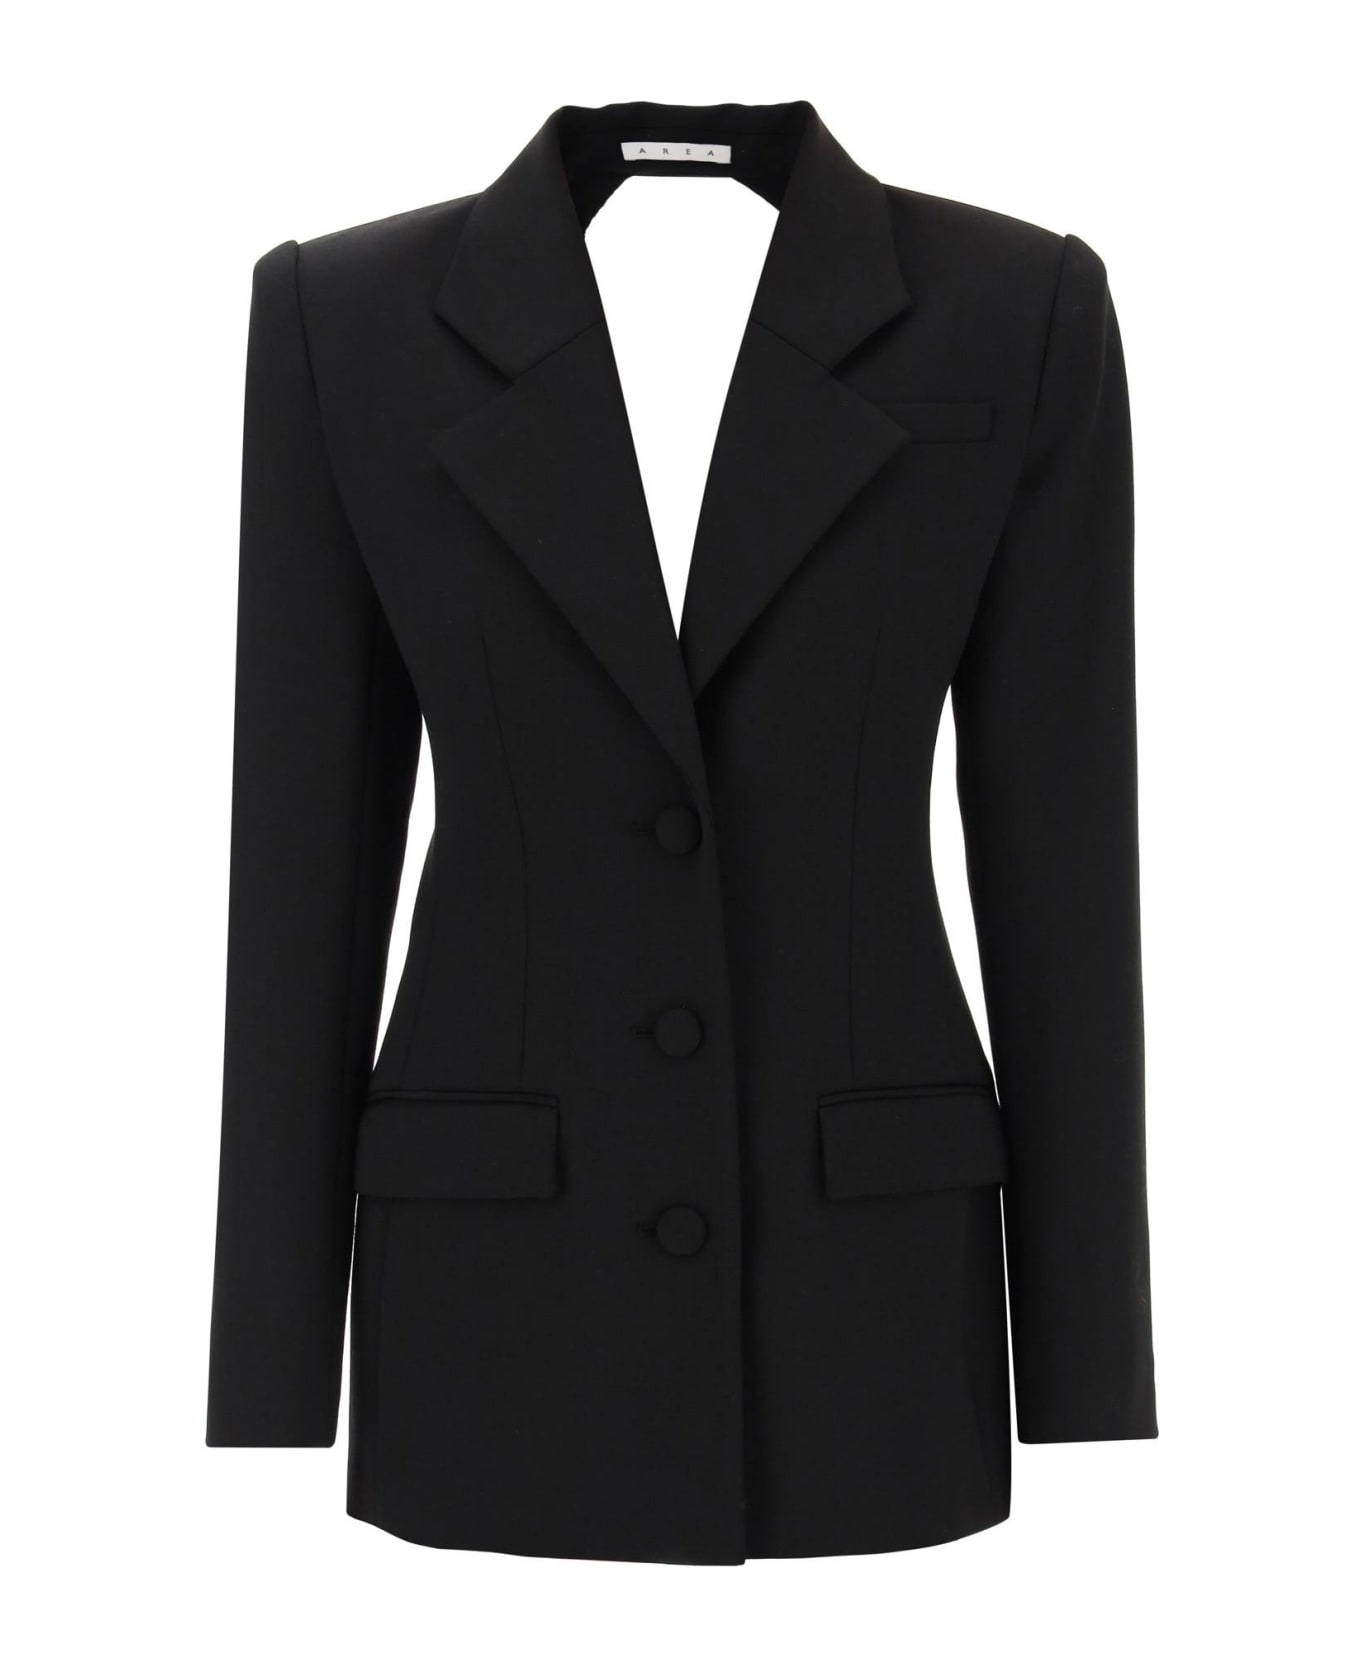 AREA Blazer Dress With Cut-out And Crystals - BLACK (Black)